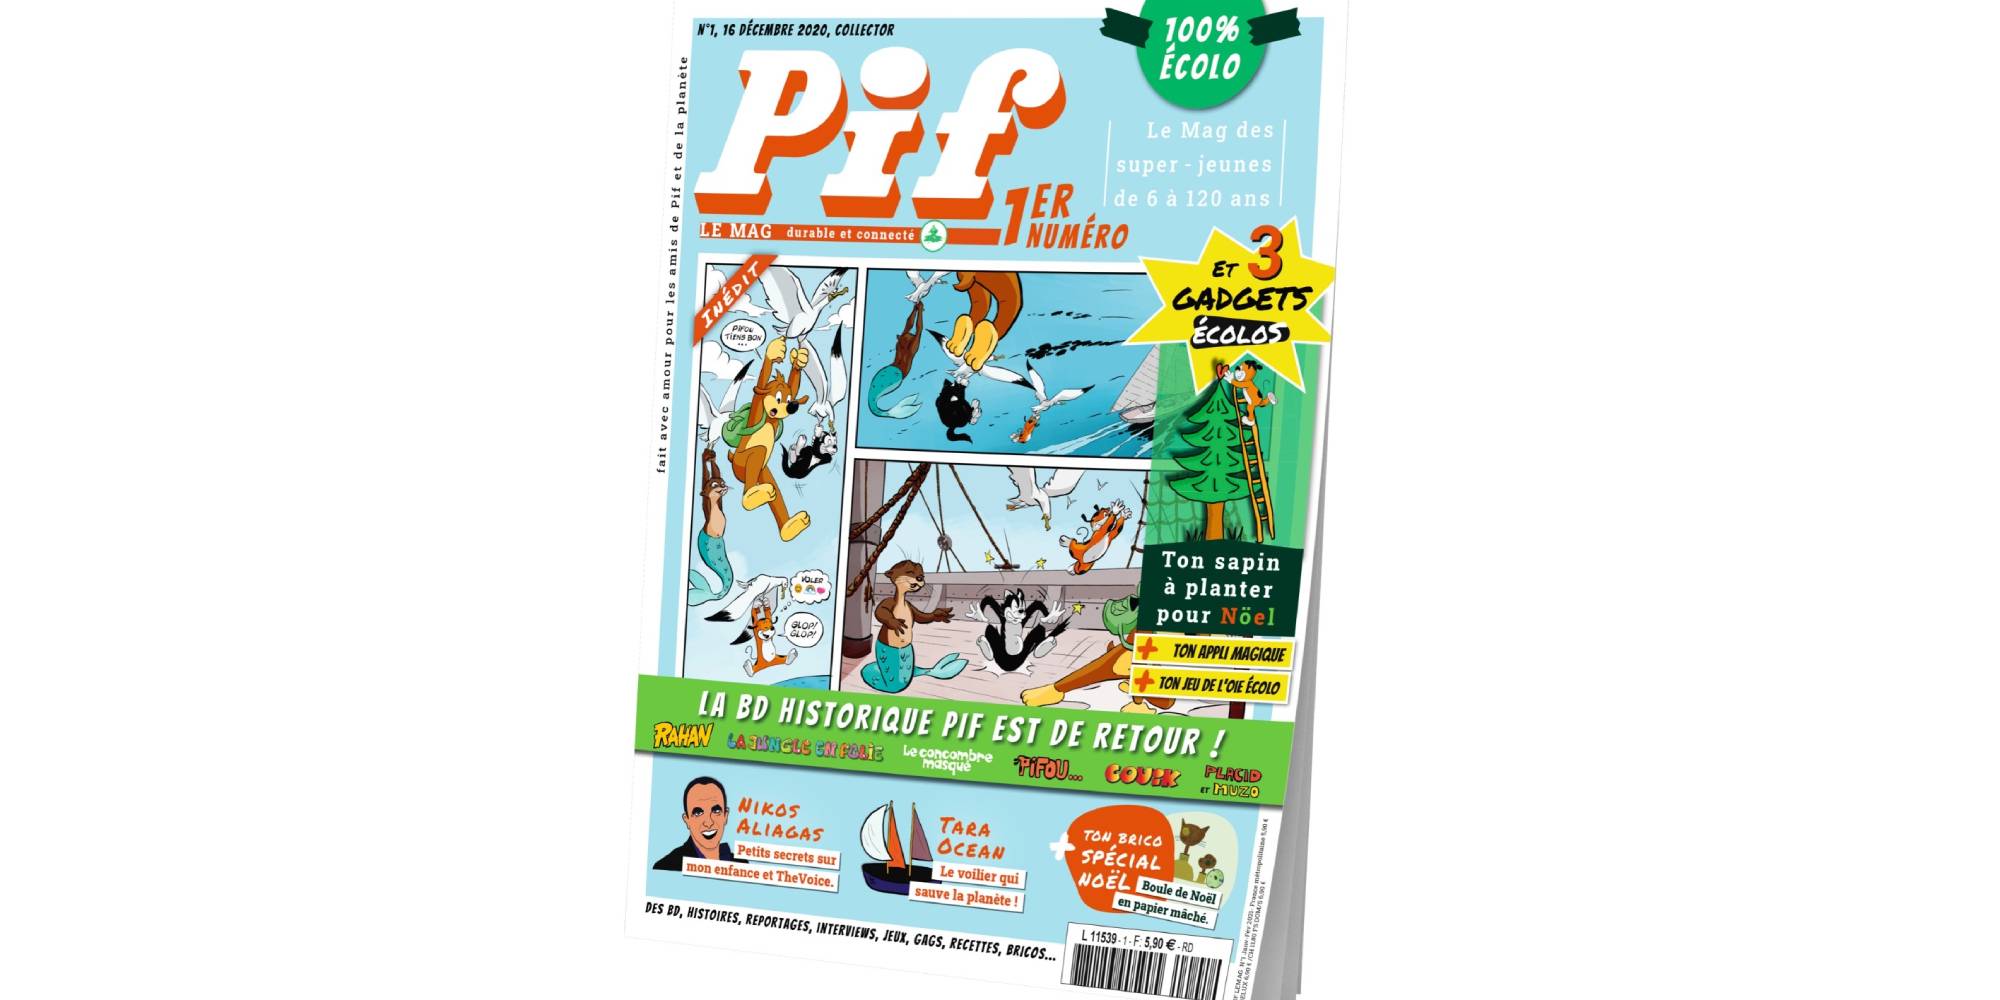 Pif is back with “Pif le Mag” and… three eco-friendly gadgets